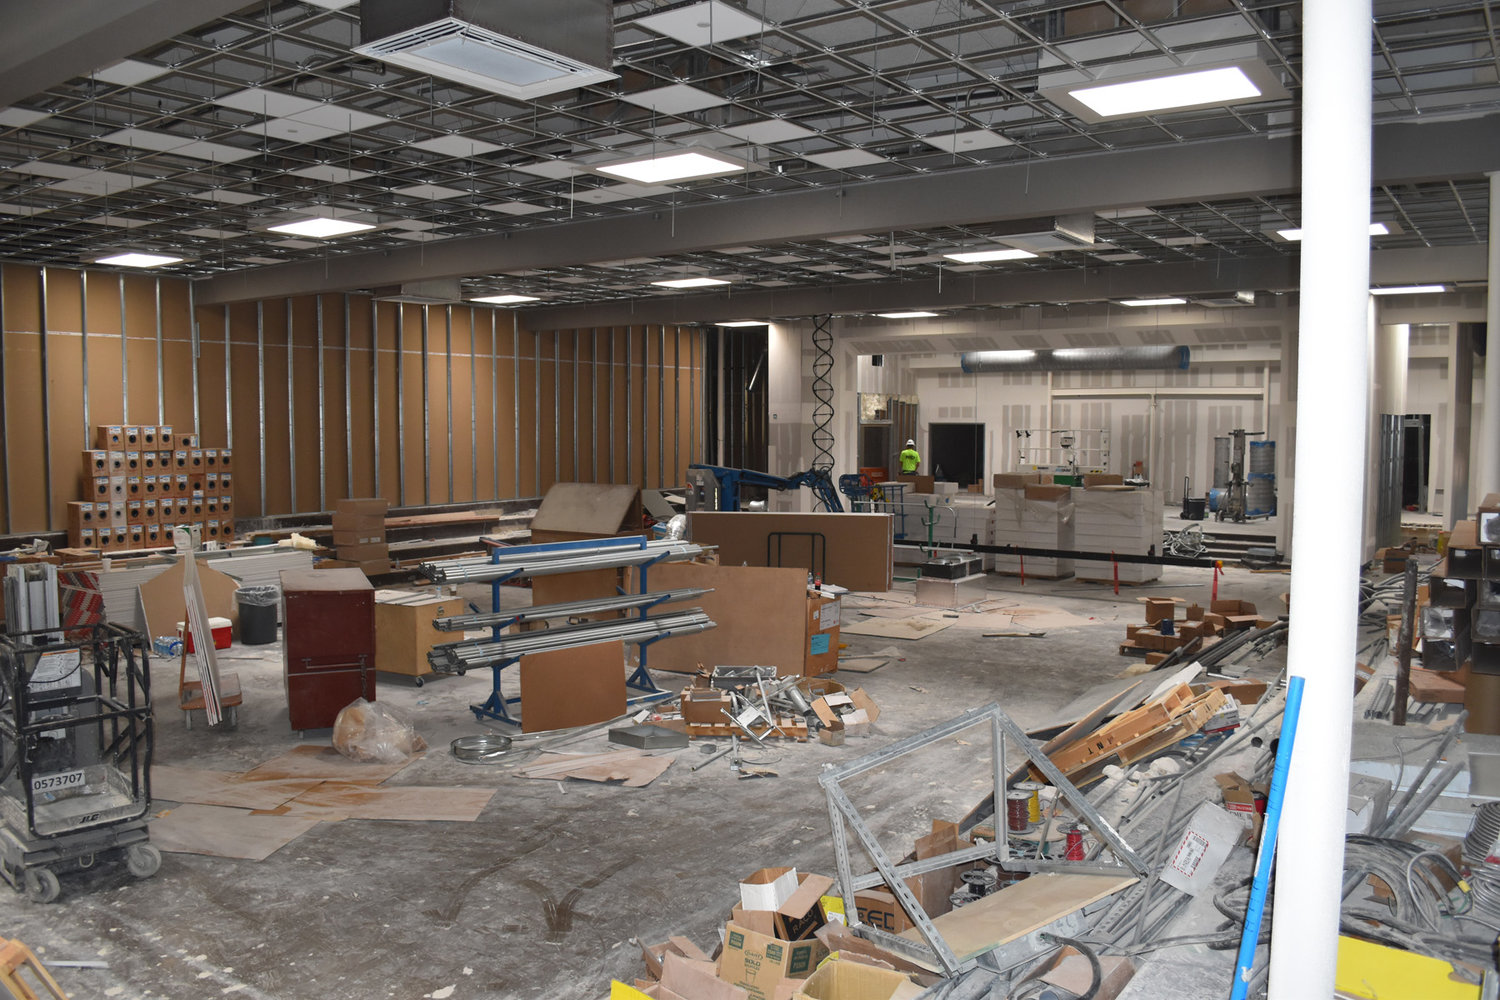 Bearcat Den under construction. The temporary wall at left will be taken down when complete for access to the kitchen.